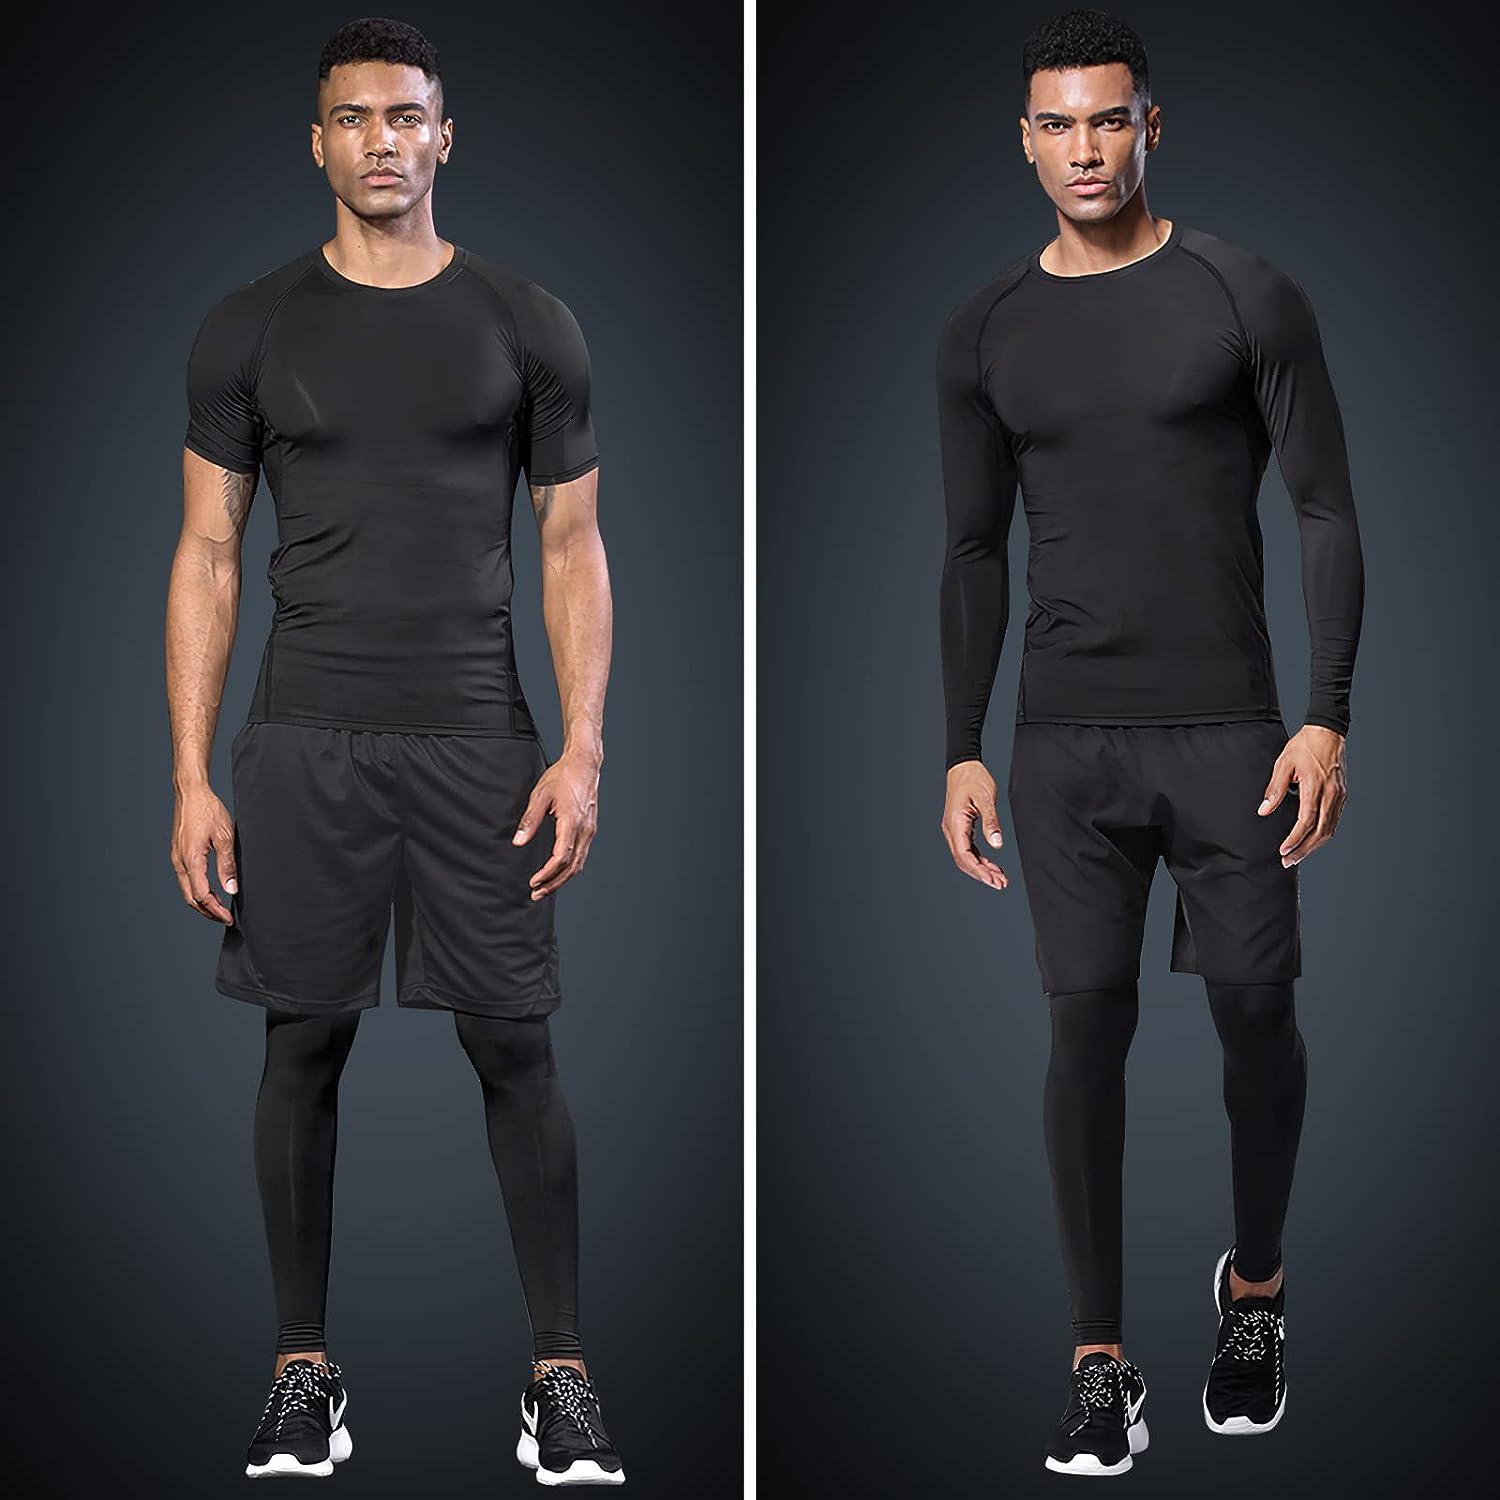 Compression Tights, Tops and Muscle Specific Compression Clothing